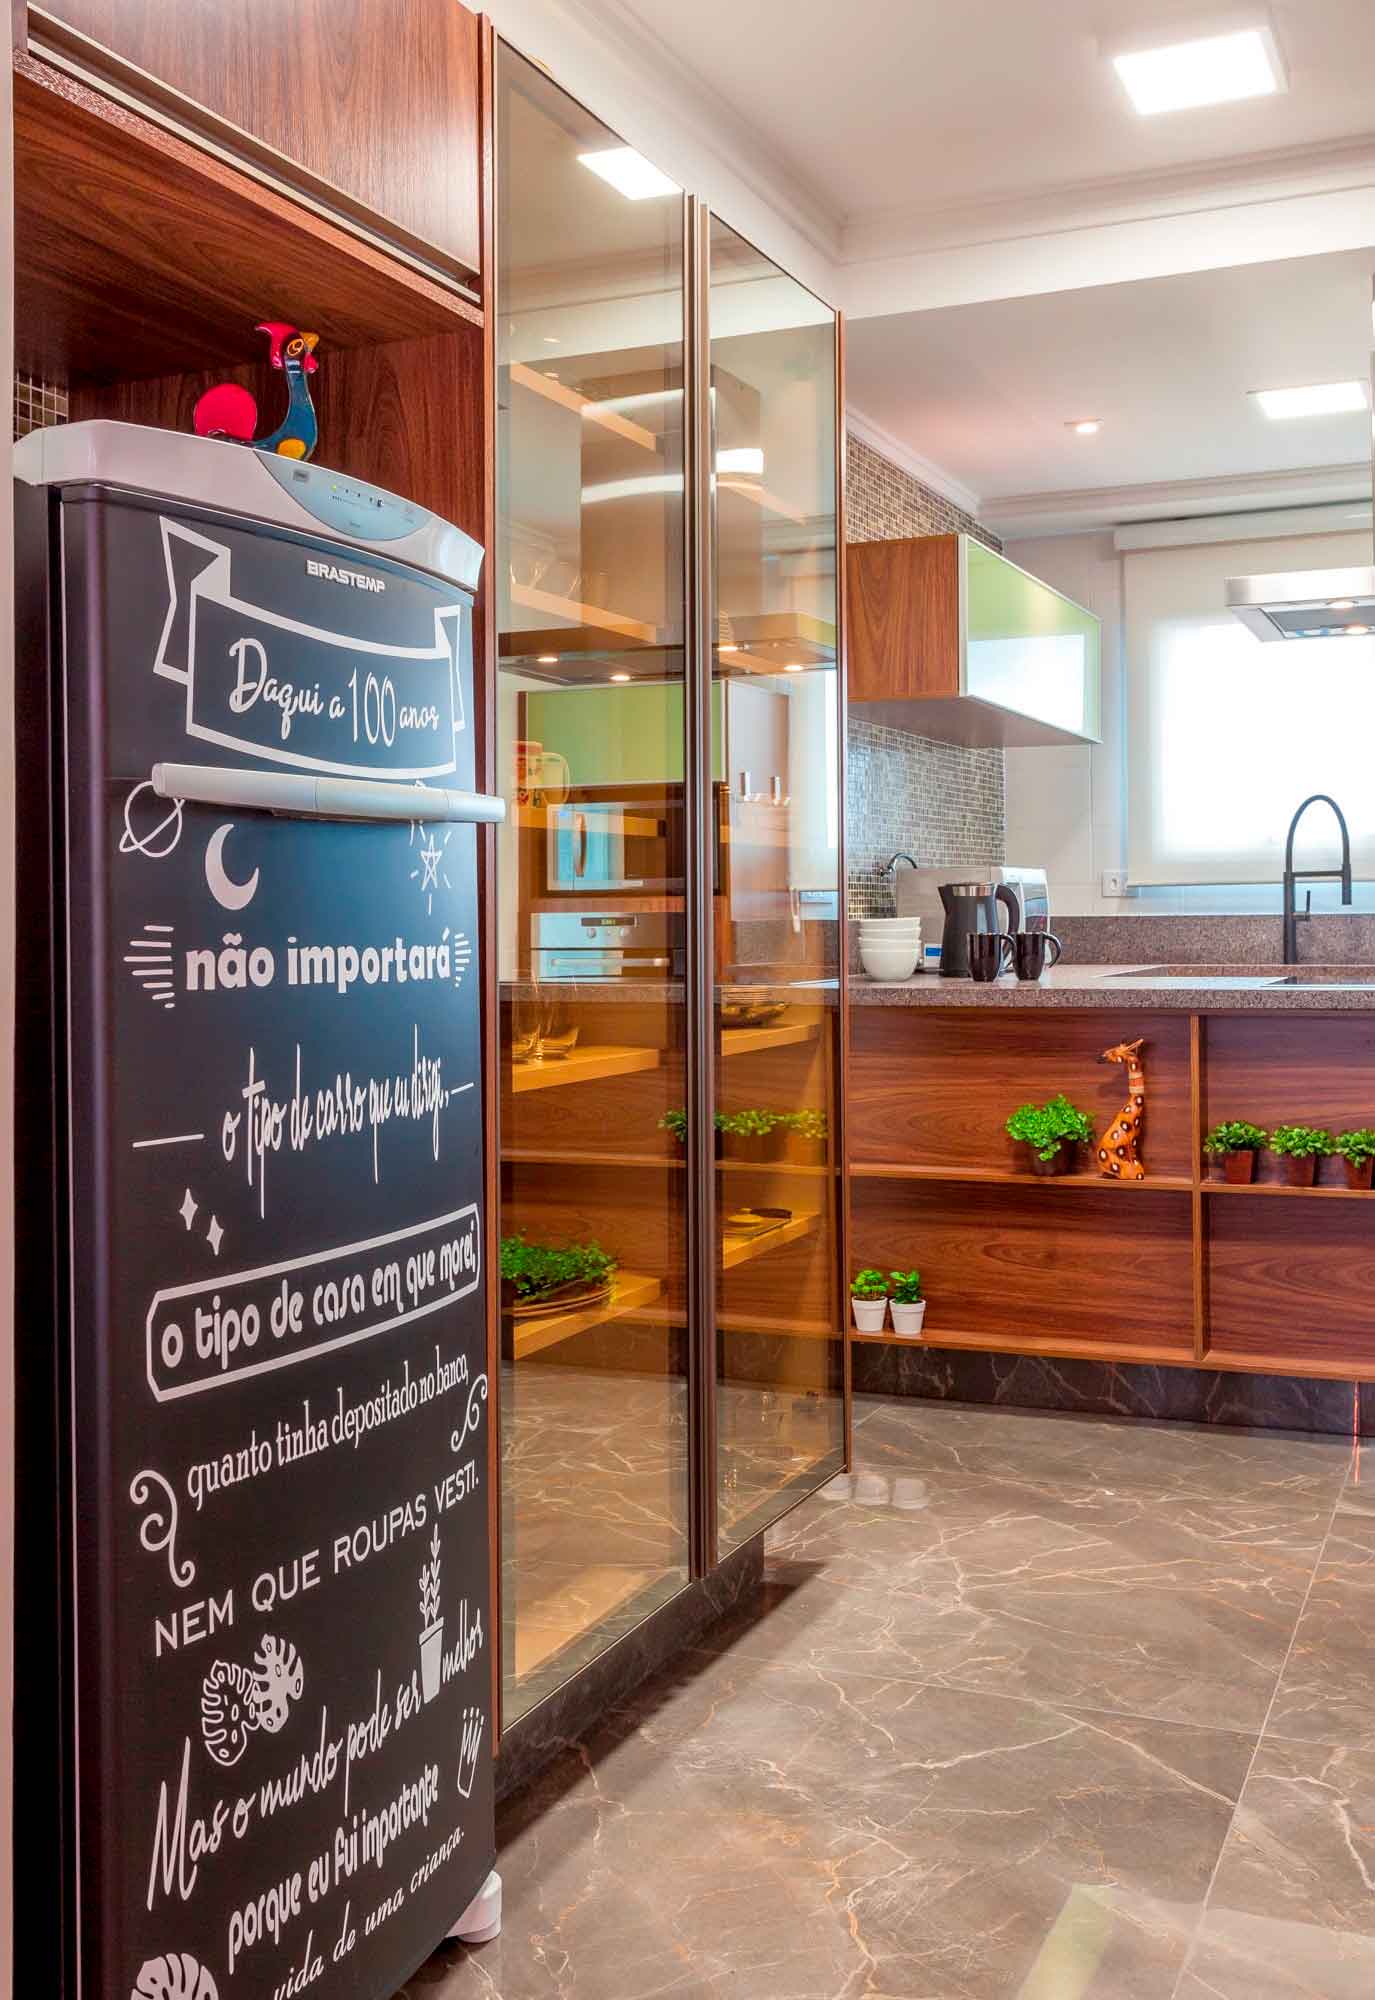 In the kitchen designed by architect Cristiane Schiavoni, the refrigerator wrapping allowed for adding a unique fridge for the residents. With a chalkboard feel, the door highlights positive messages | Photo: Carlos Piratininga